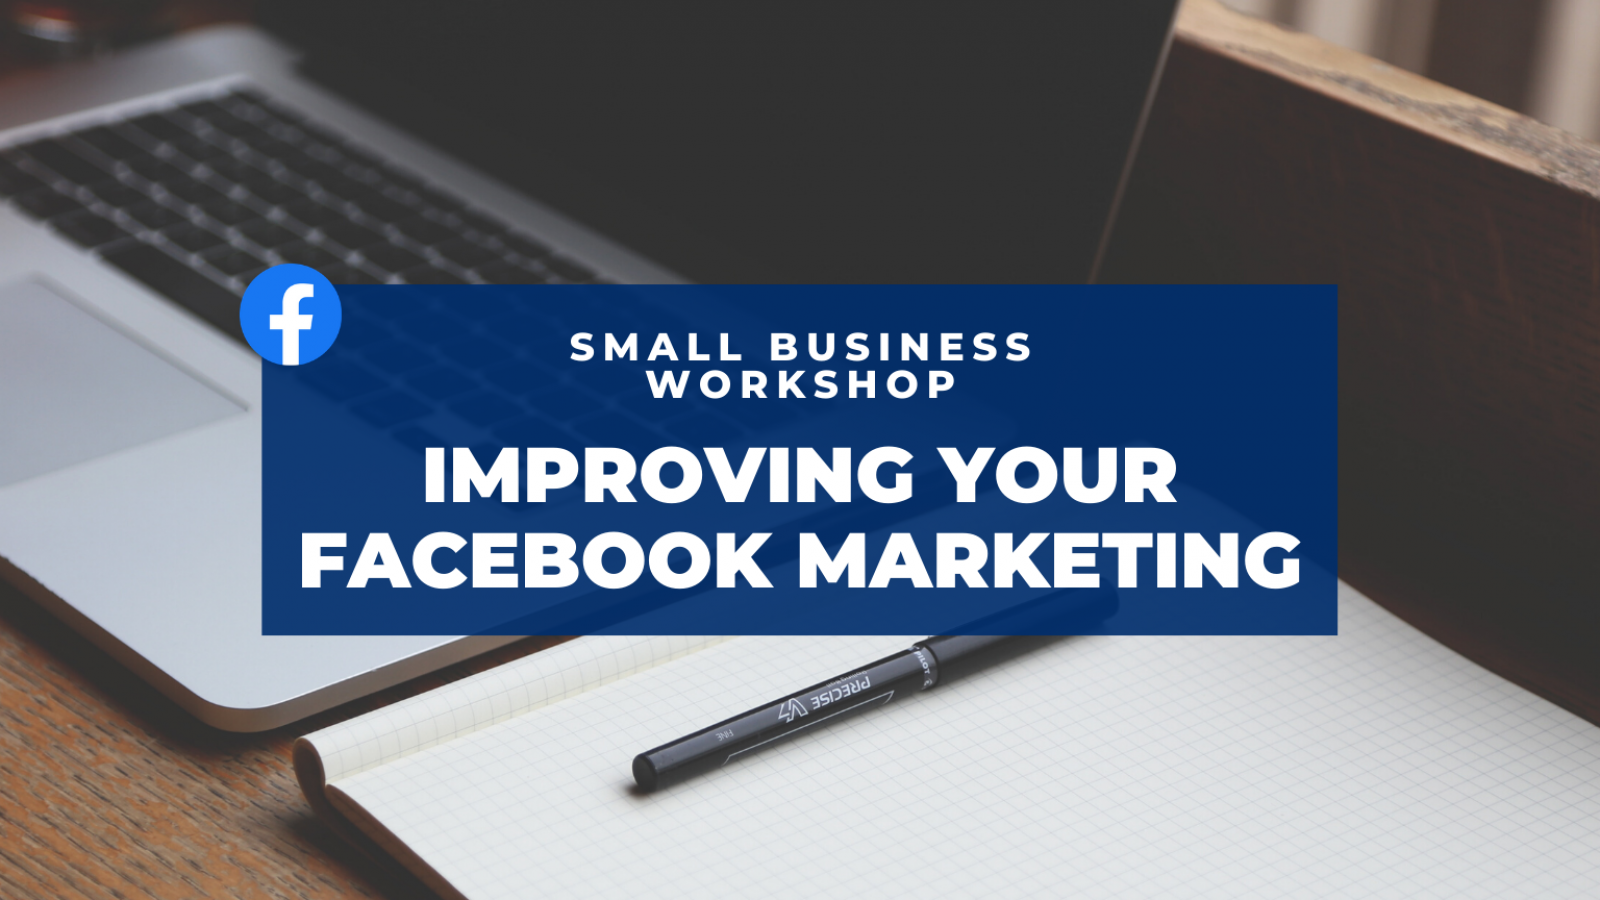 Improving your Facebook Marketing at this Small Business Workshop. Laptop and tablet of paper in background.